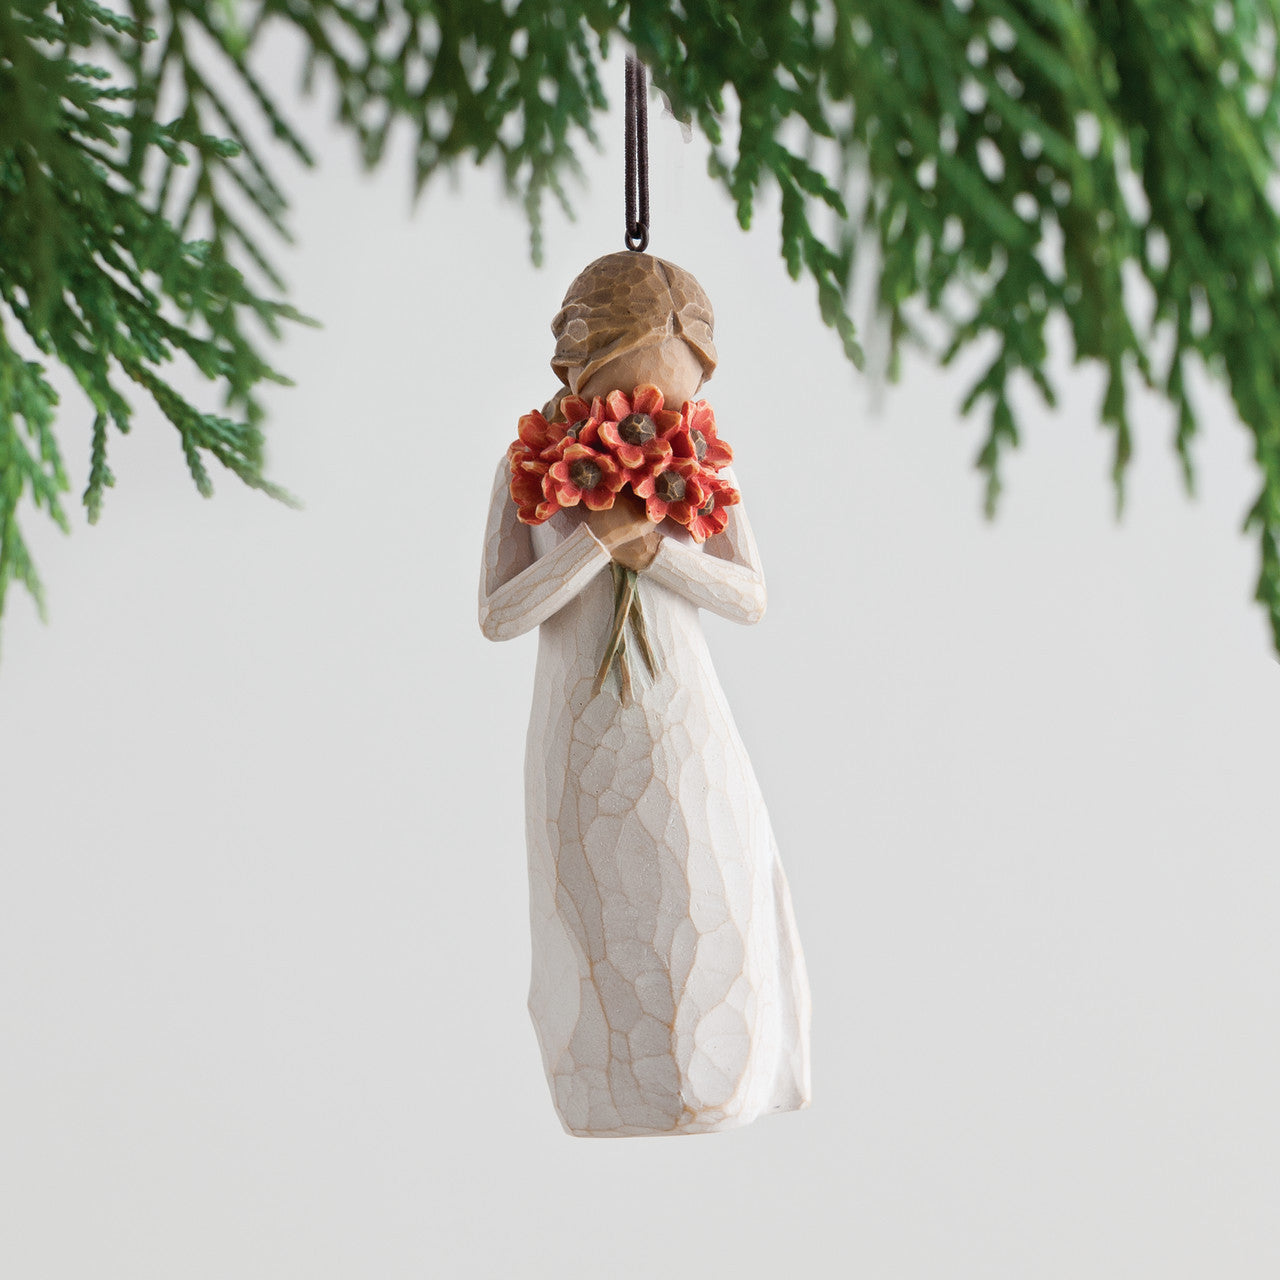 Willow Tree "Surrounded by Love" Hanging Ornament